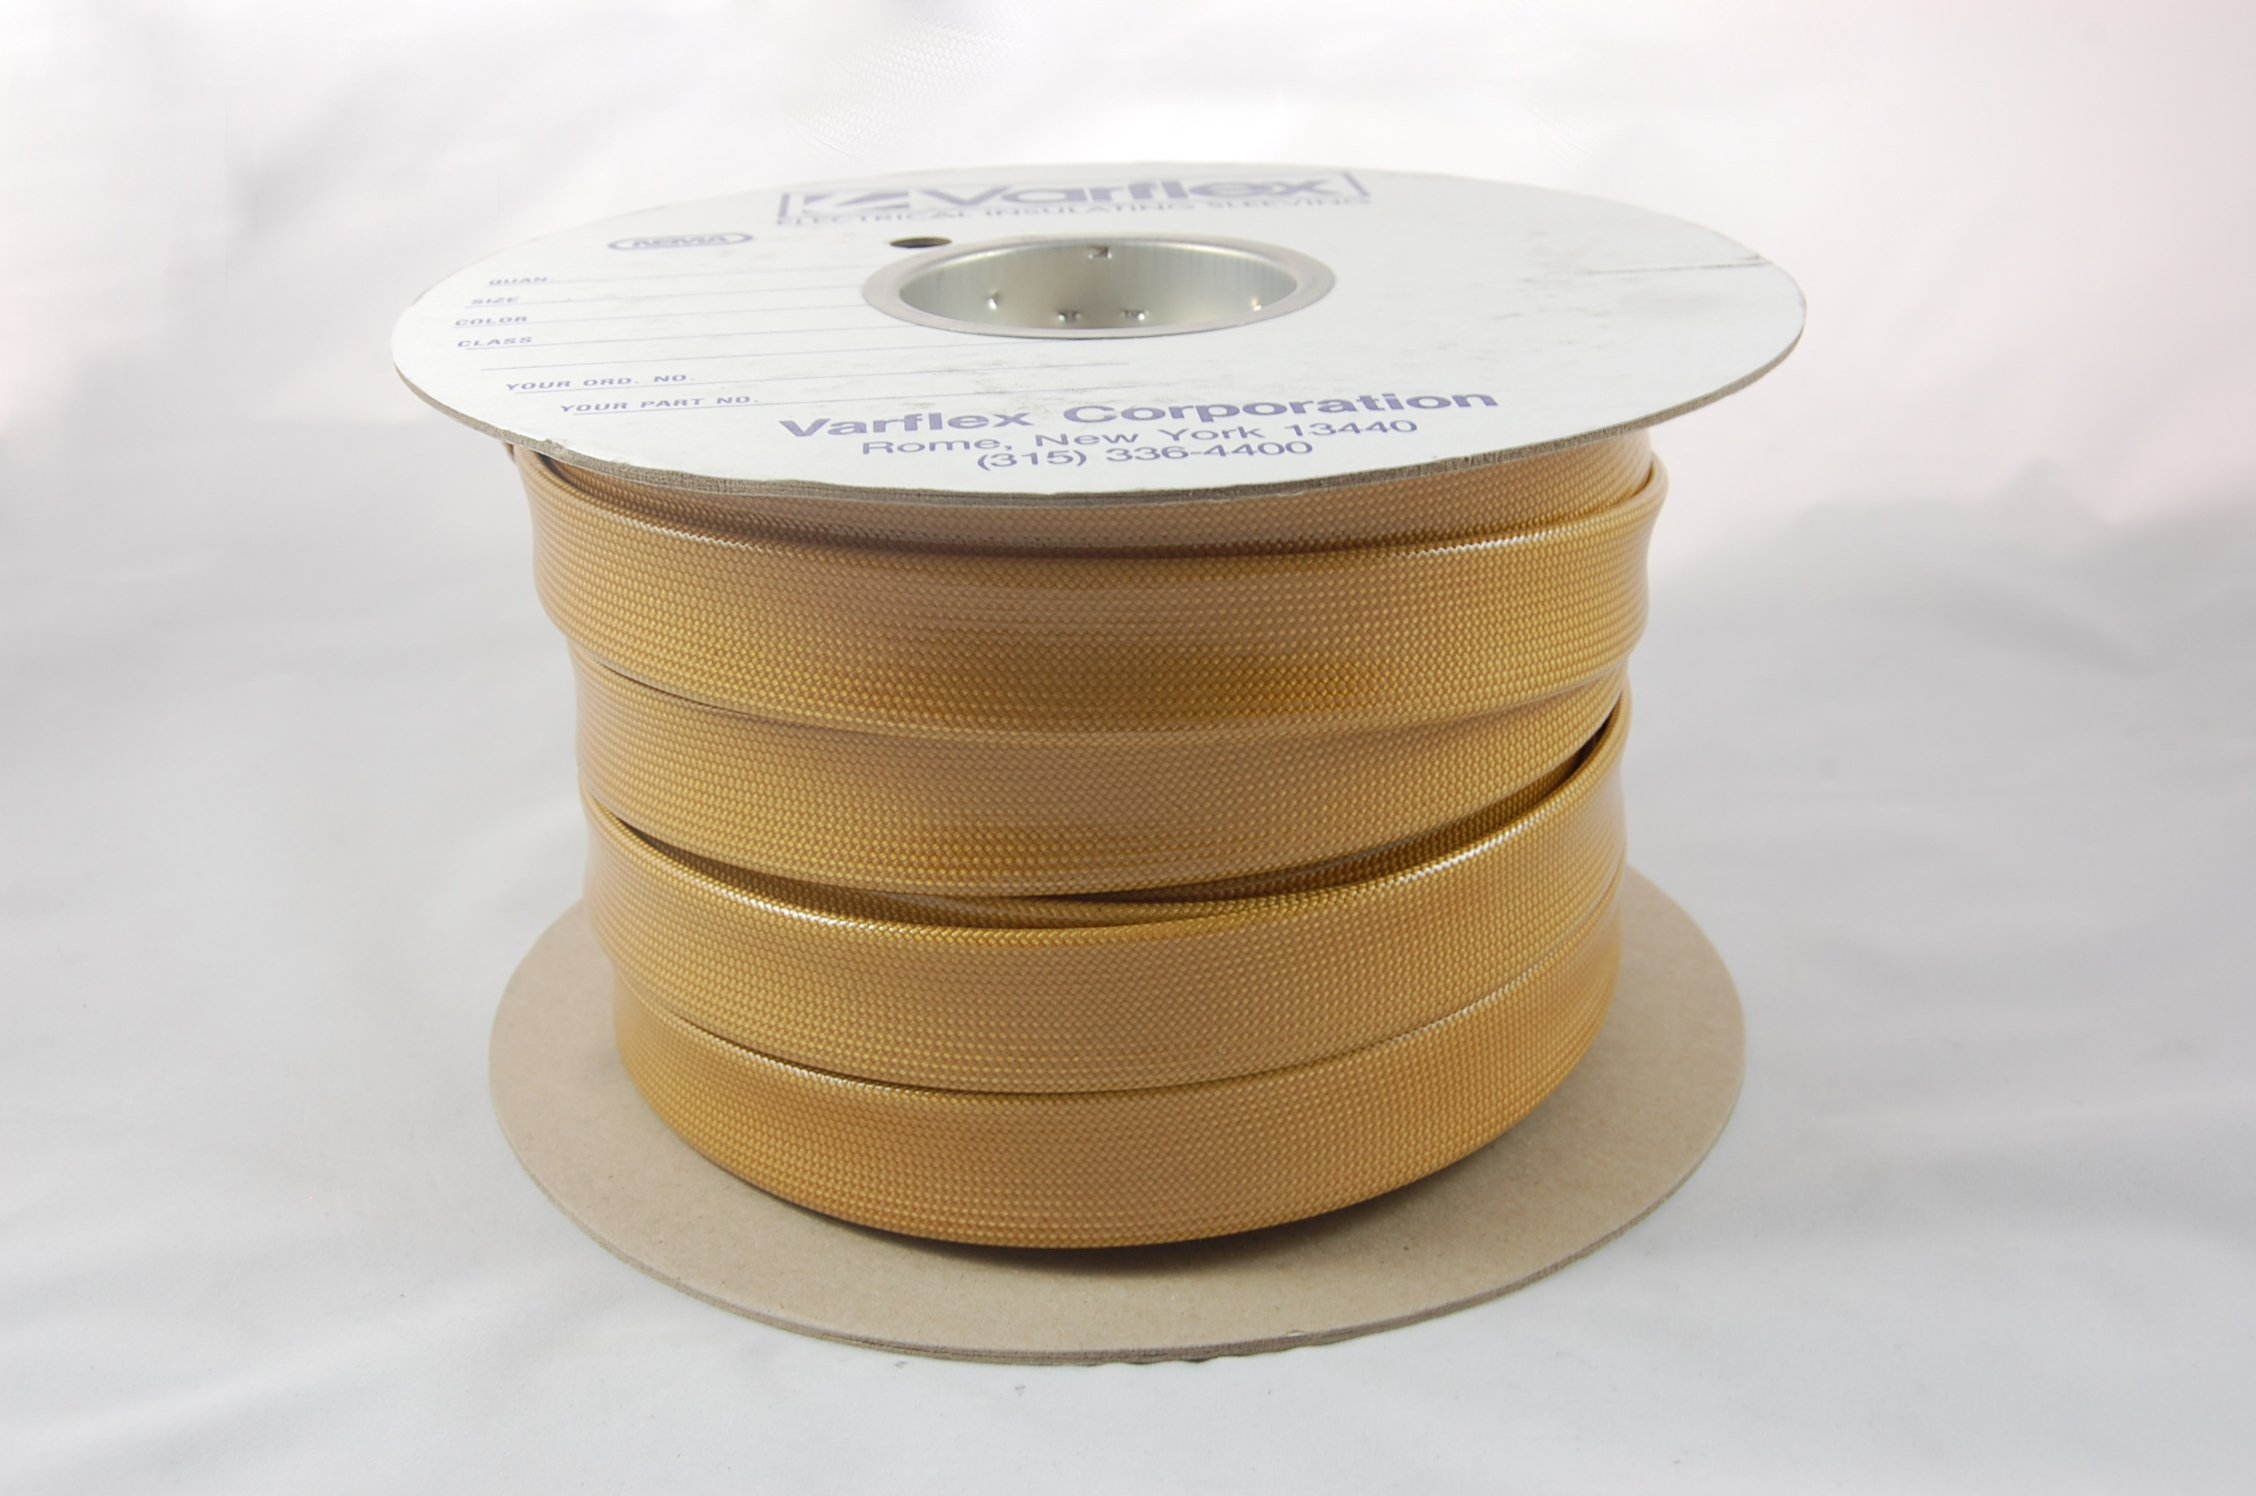 1" AWG Varglas Silicone Resin 500 Grade H-C-1 (2500V) High Temperature Silicone Resin Coated Braided Fiberglass Sleeving 200°C, natural, 100 FT per spool